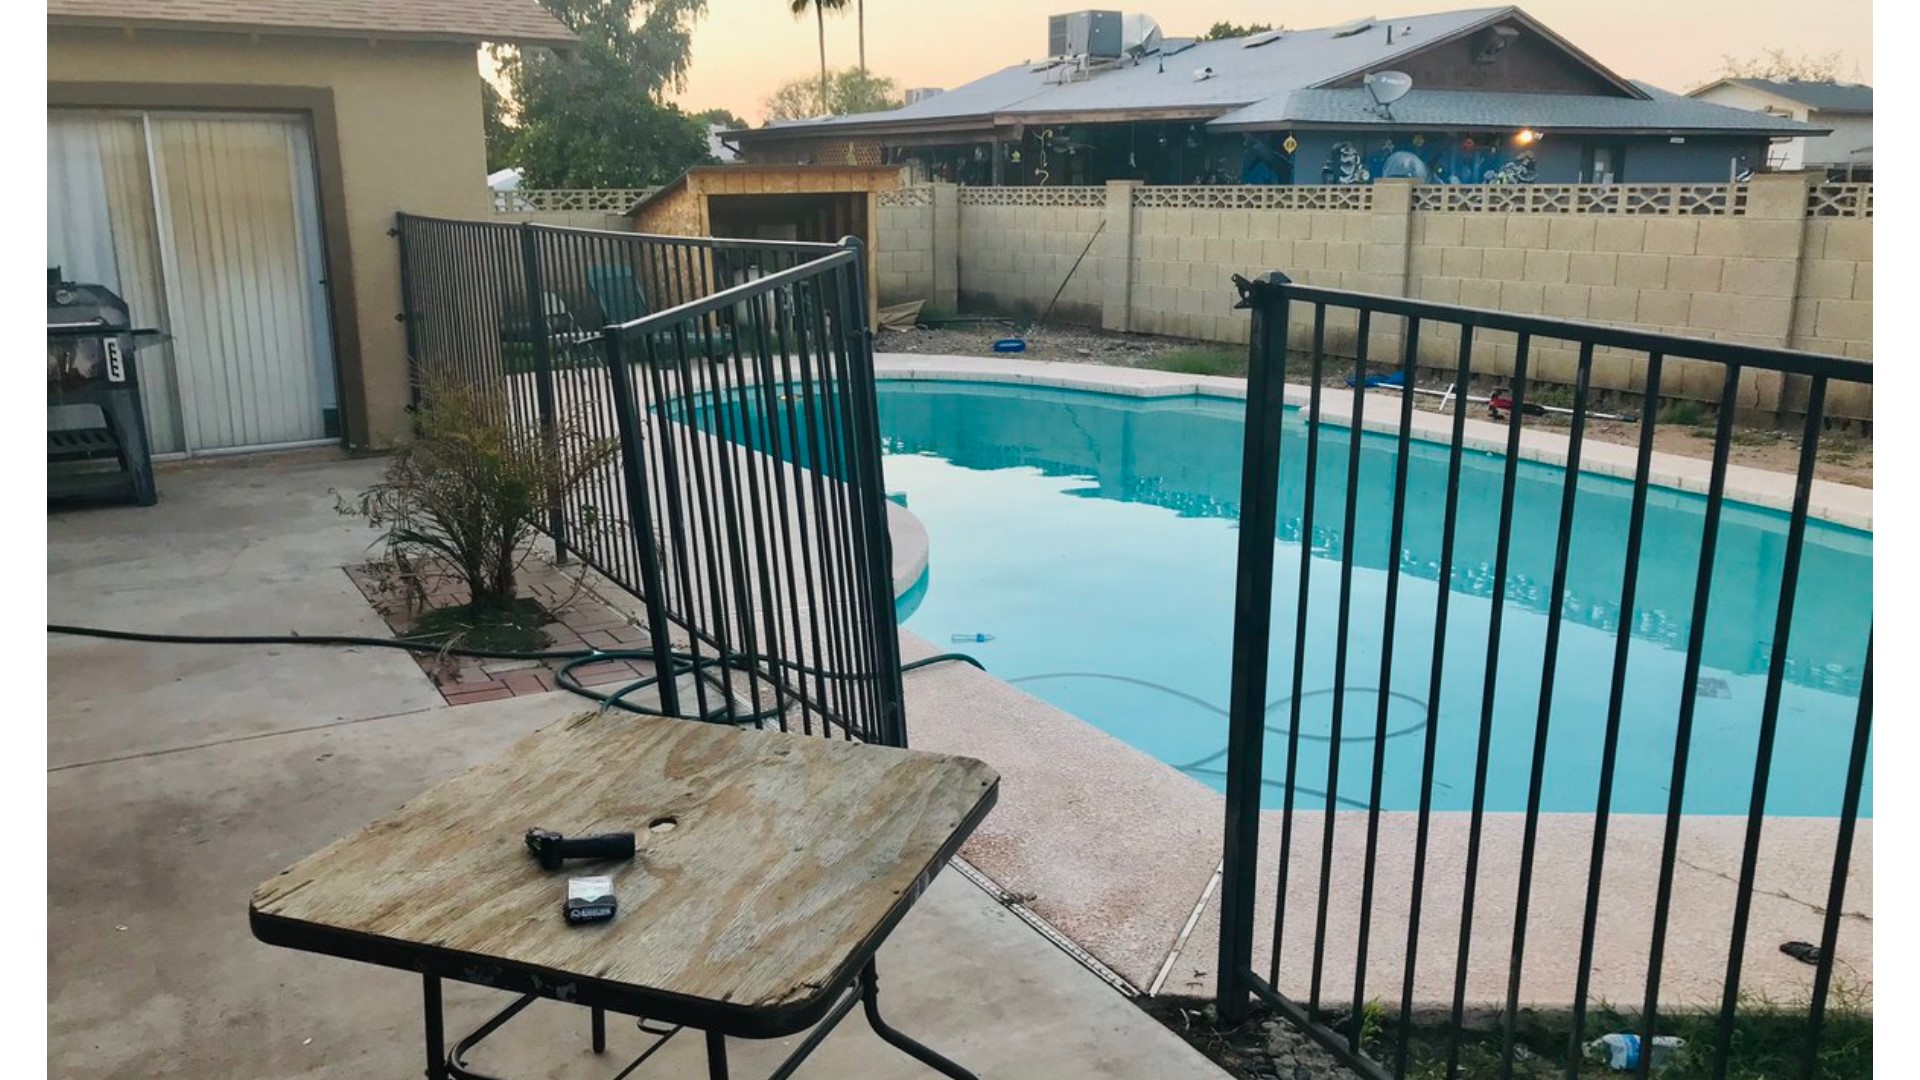 As summer approaches, families are heading to their pools and the chances of a child drowning go up. One Valley mom shares her story to remind others of the dangers.